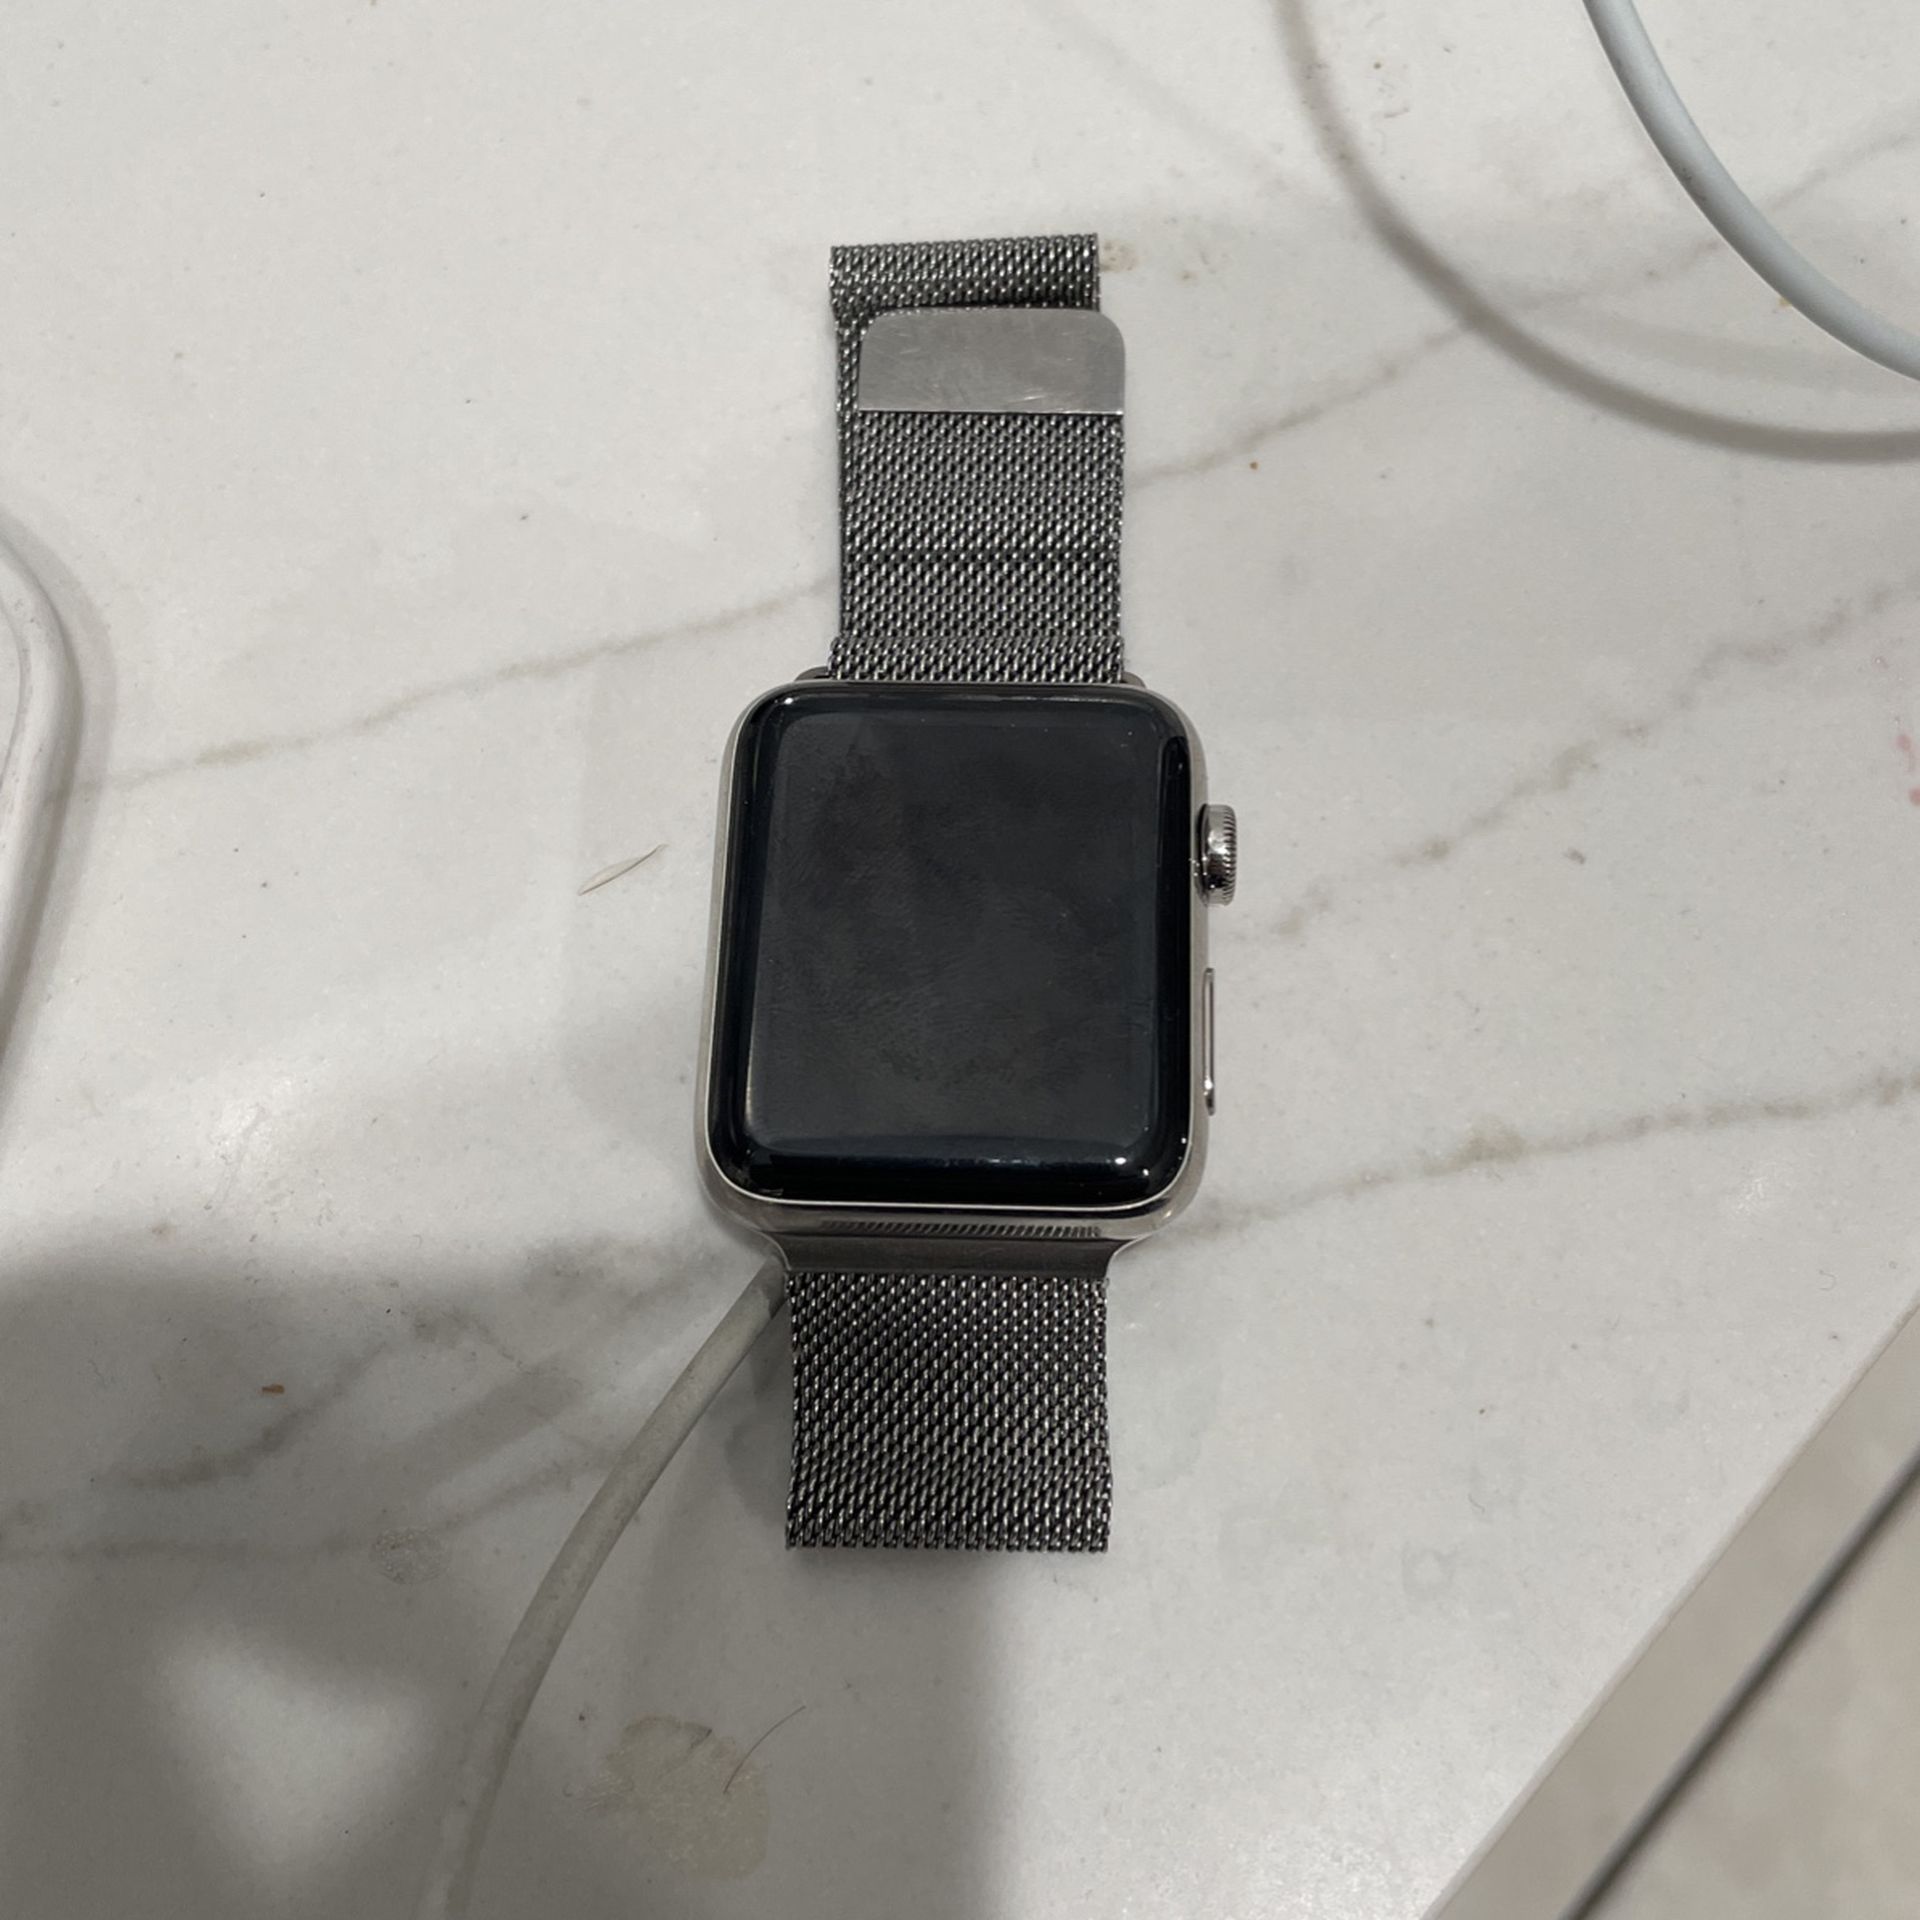 Apple Watch Series 3 Cellular /Wi-Fi Touch Isn’t Working Properly